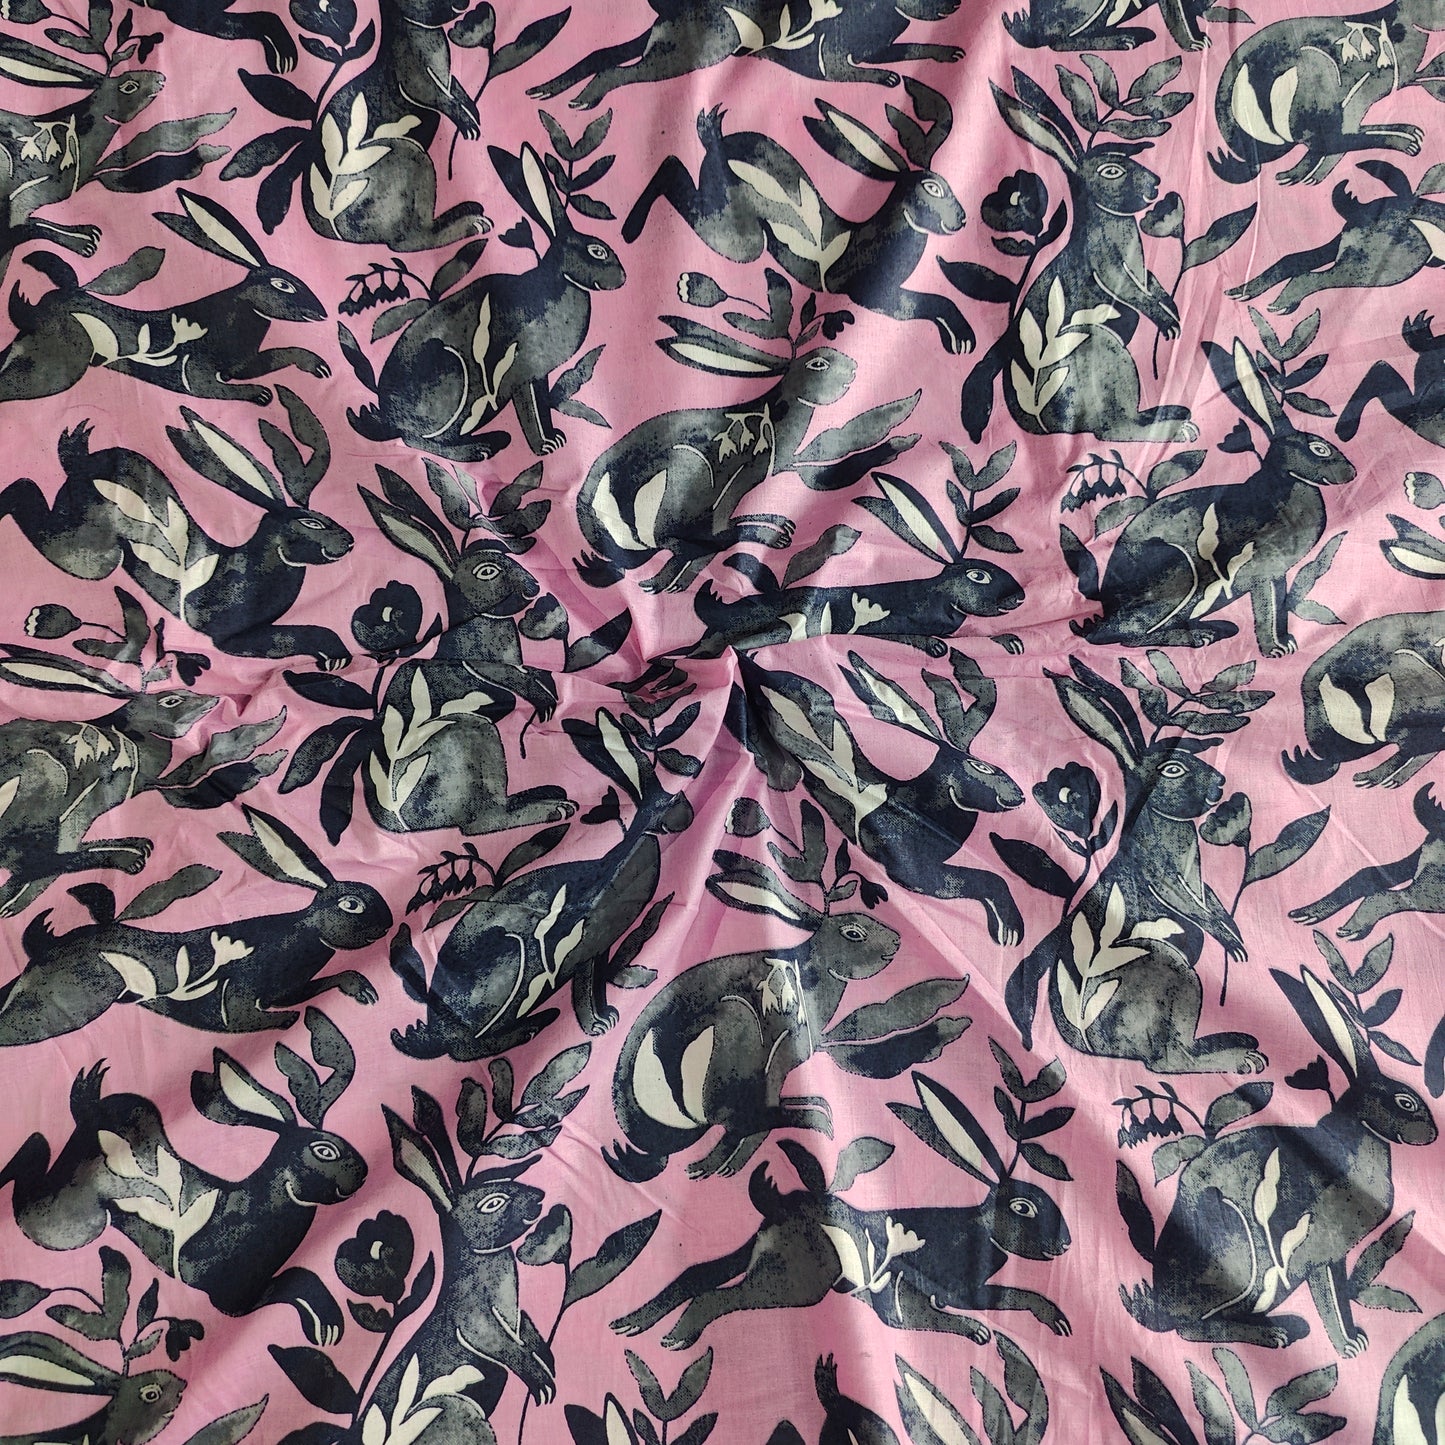 Wild Rabbit cambric fabric 44 inches width-Pink and Black